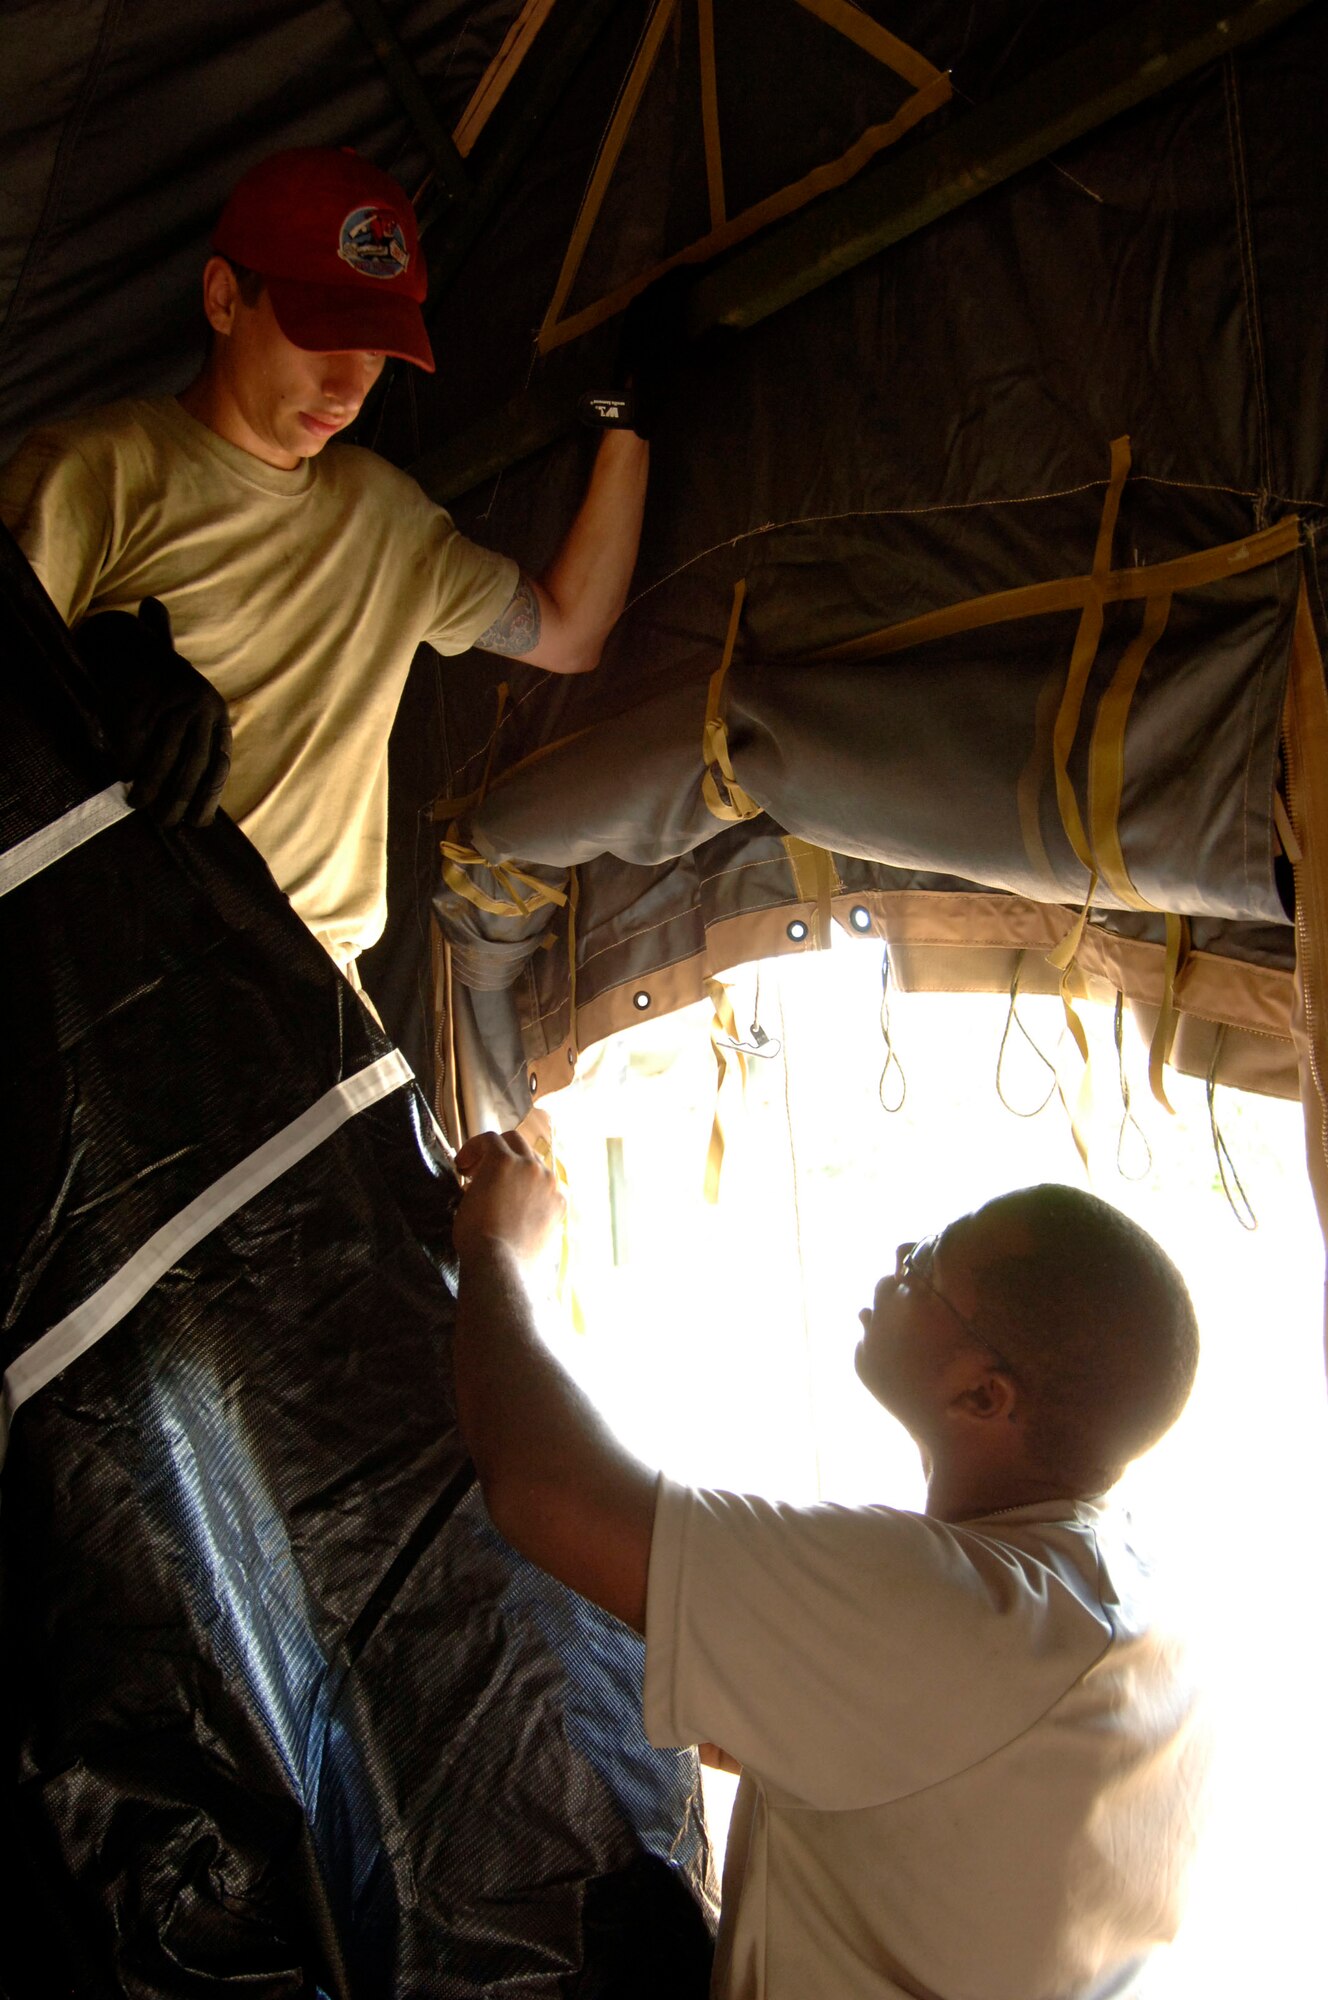 Senior Airmen Phillip Conroy (left) and Markiss Hines, 567th RED HORSE Squadron, install the inner liner to a tent at the temporary encampment that will house more than 250 Airmen, Soldiers, and Marines for New Horizons Panama 2010. (U.S. Air Force photo/Tech. Sgt. Eric Petosky)